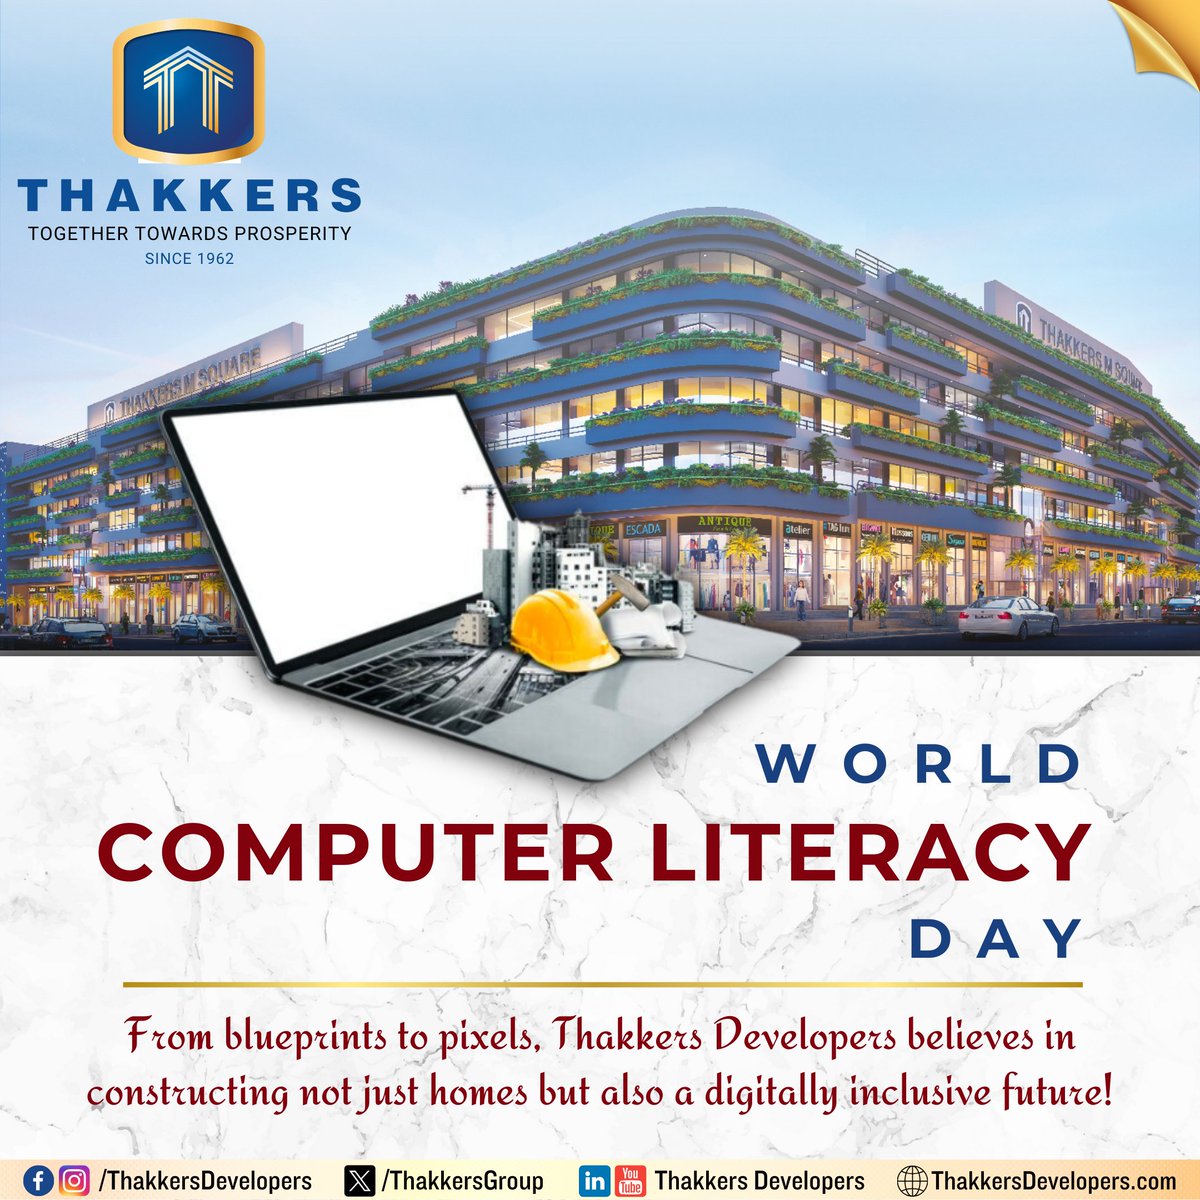 Empowering futures through bricks and clicks! Thakkers Developers celebrates World Computer Literacy Day by not just building homes but also fostering a digital ecosystem within our communities.

#ThakkersDevelopers #BuildingBrighterTomorrows #WorldComputerLiteracyDay